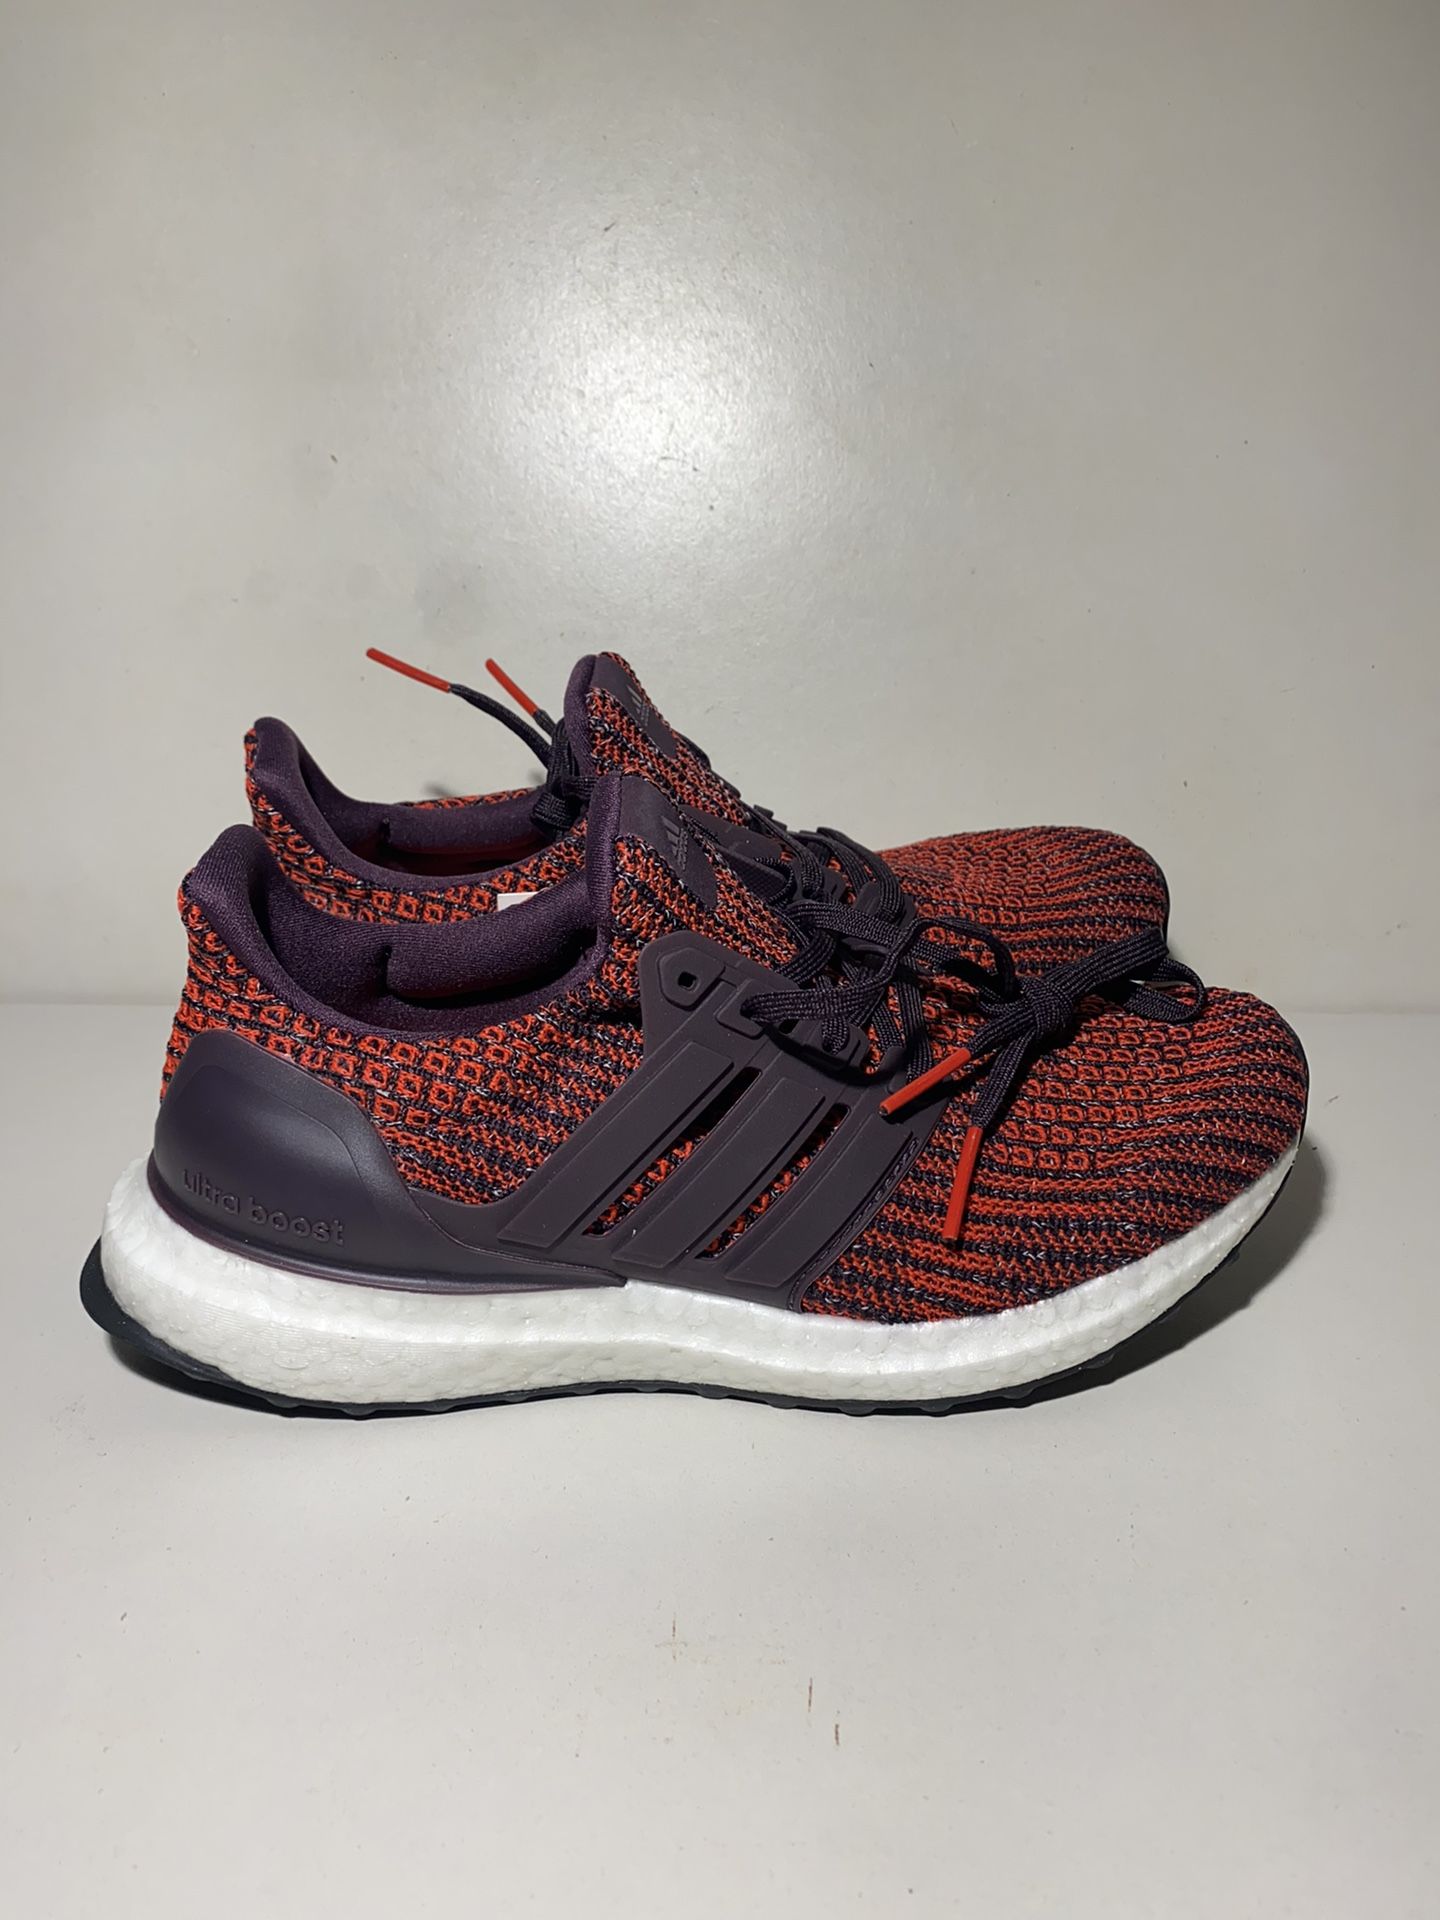 Adidas UltraBoost 3.0 youth size 5